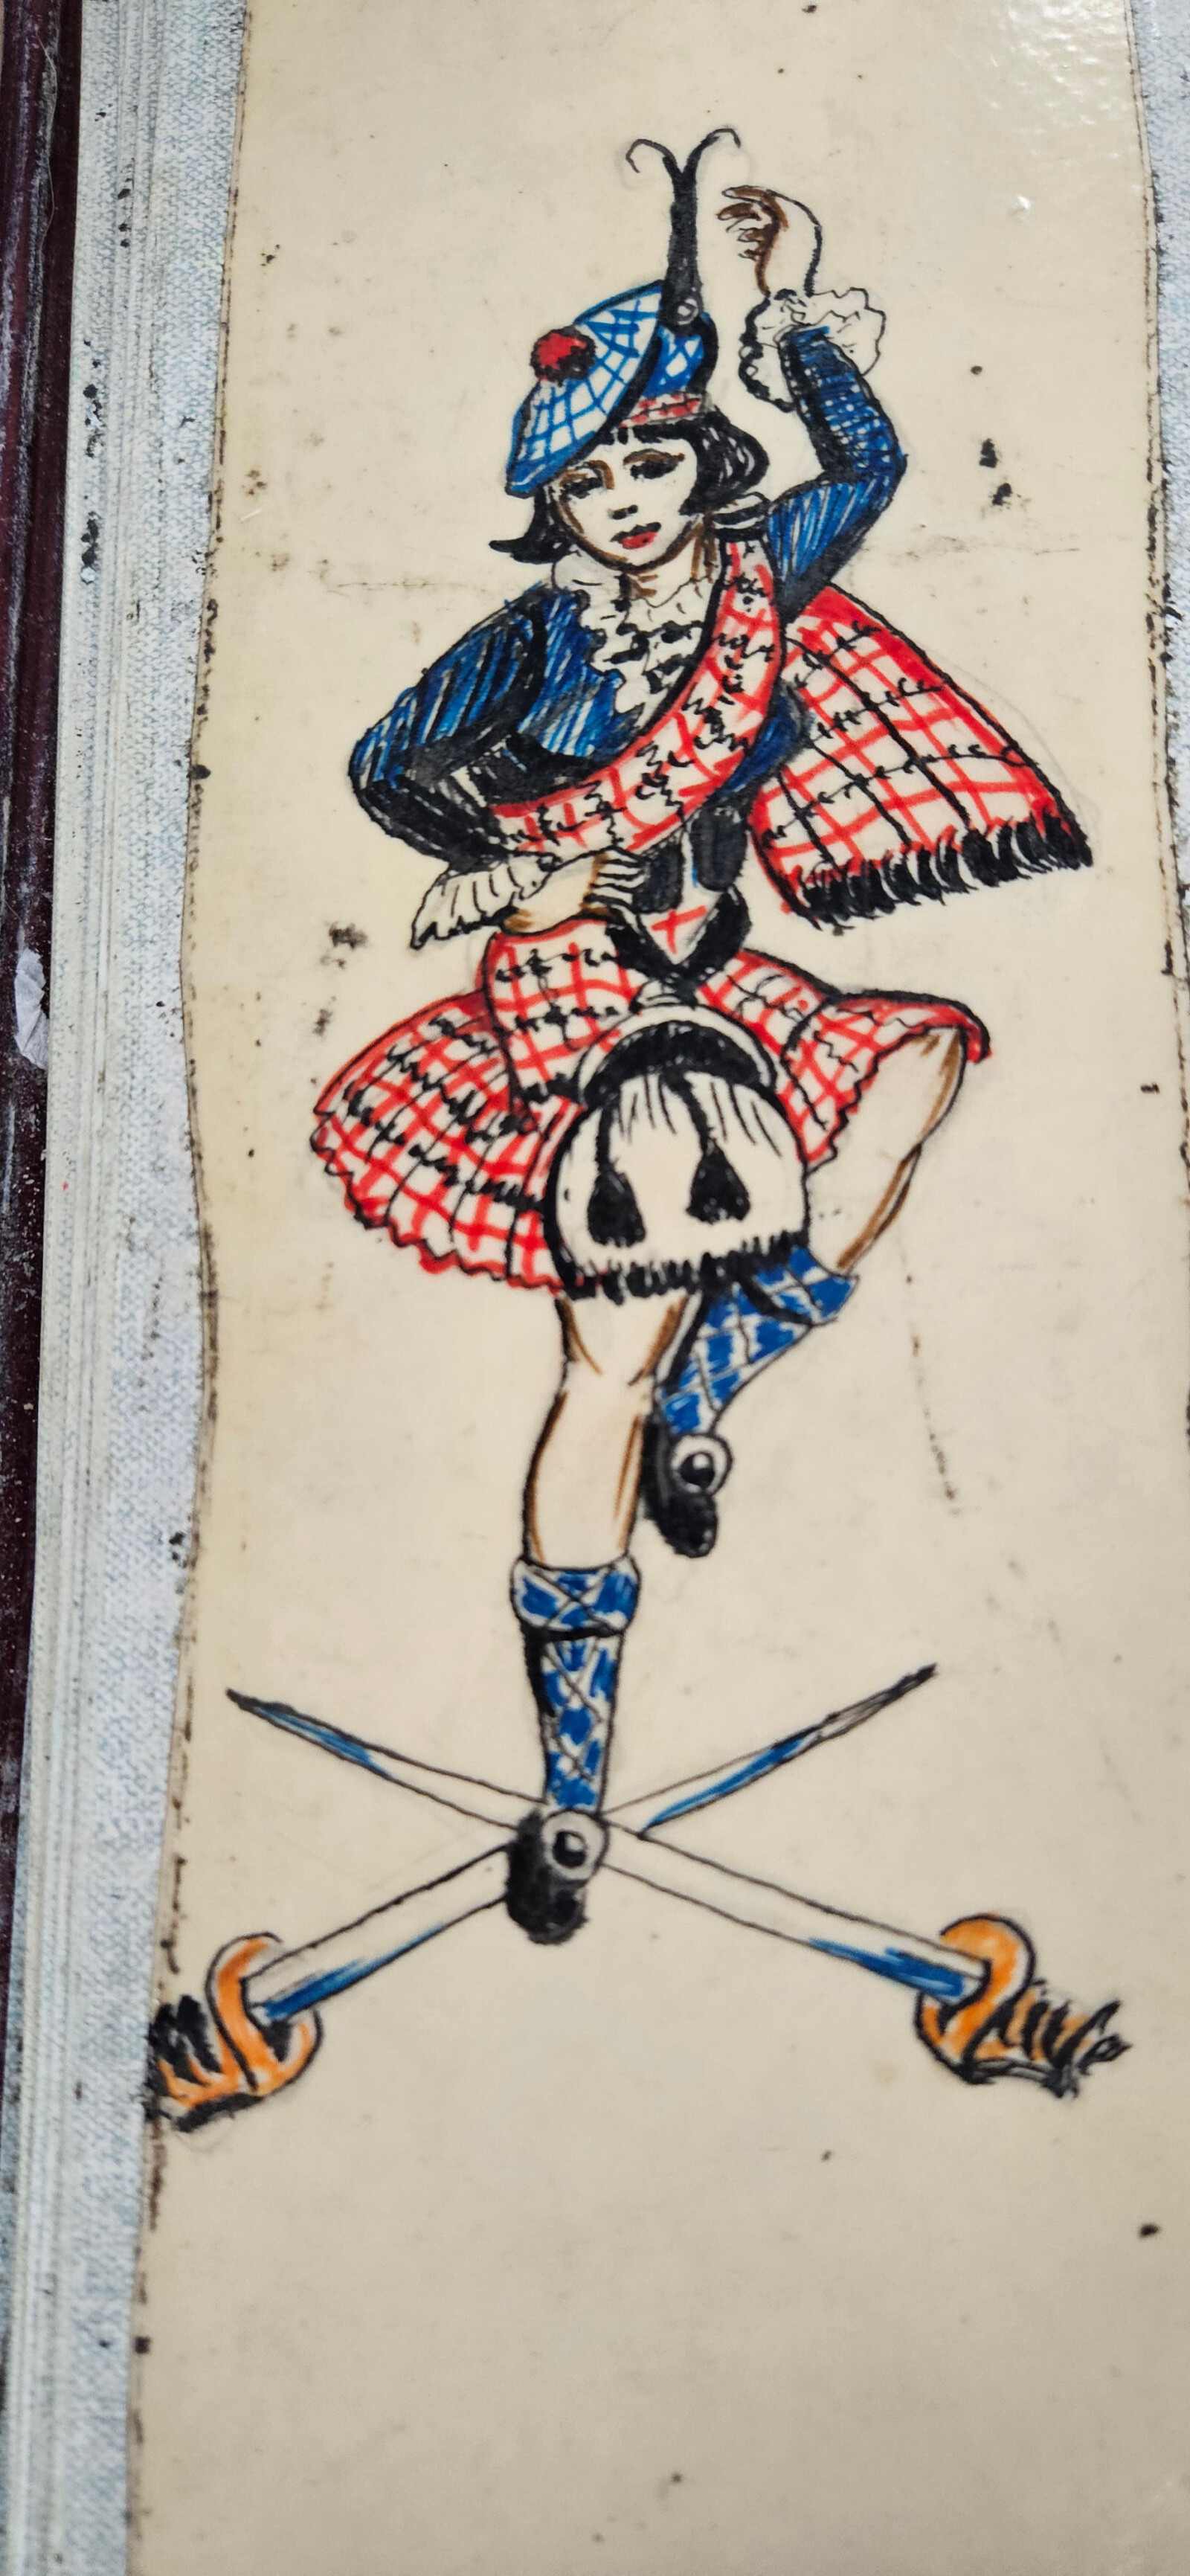 A design of a woman in a kilt dancing above two swords which are crossed